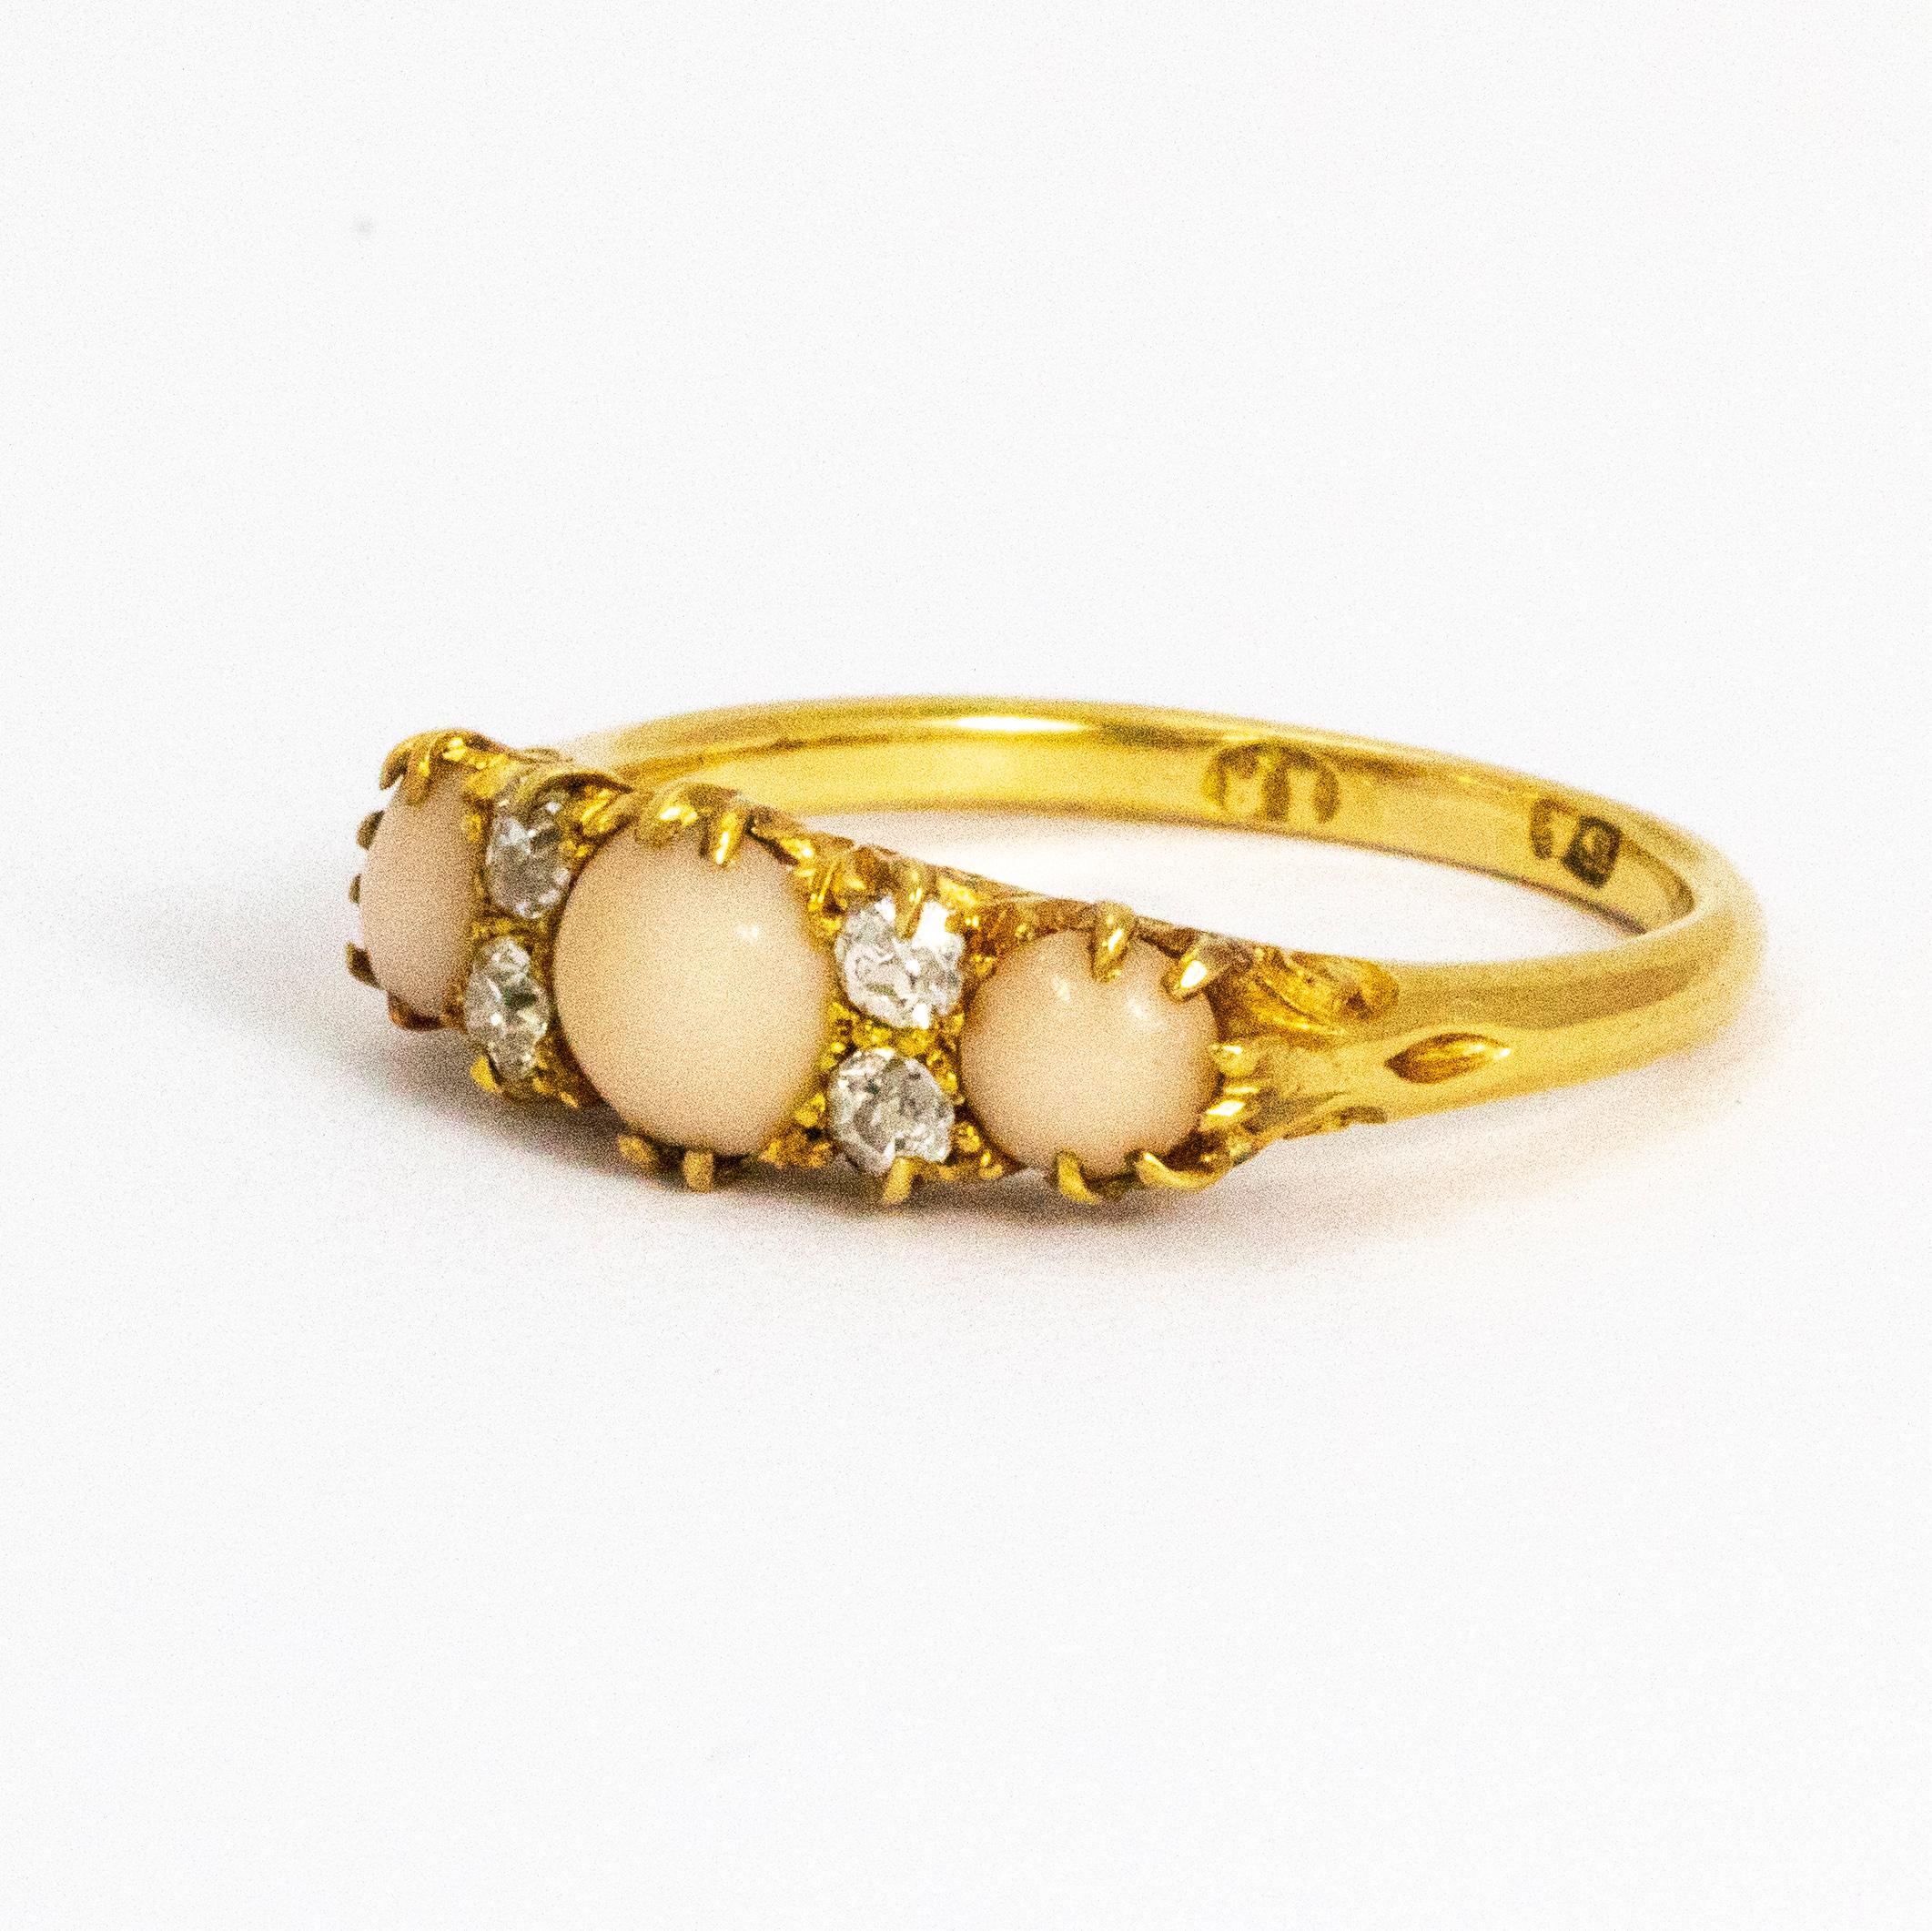 A superb victorian three-stone ring set with three beautiful graduated pale pink circular coral cabochons. Each of the cabochons is divided by a pair of bright old European cut white diamonds. Modelled in 18 karat yellow gold.

Ring Size: O or 7.5